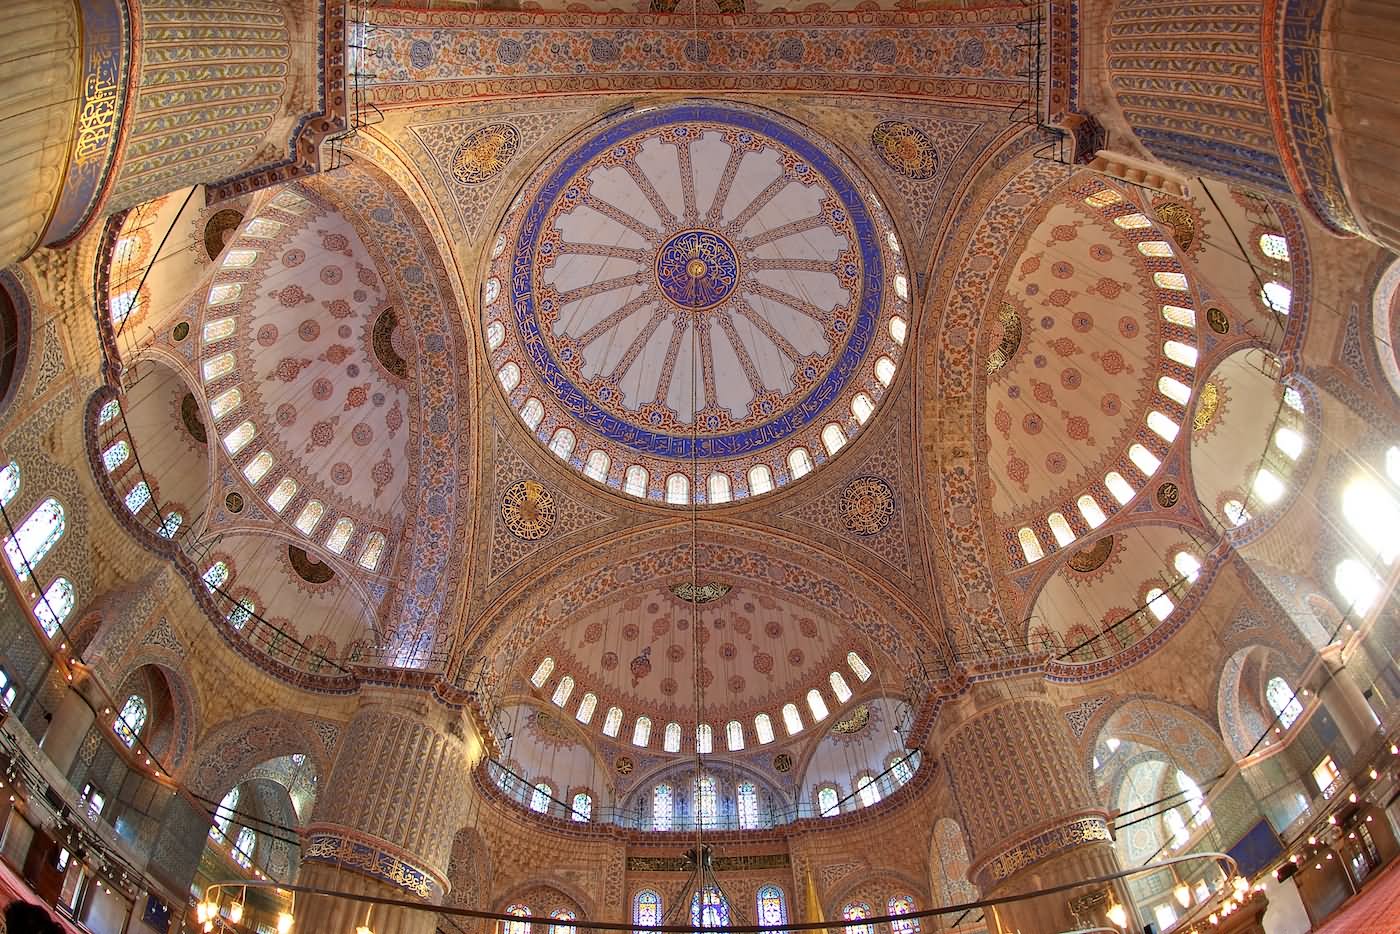 Beautiful Dome Inside The Blue Mosque, Istanbul